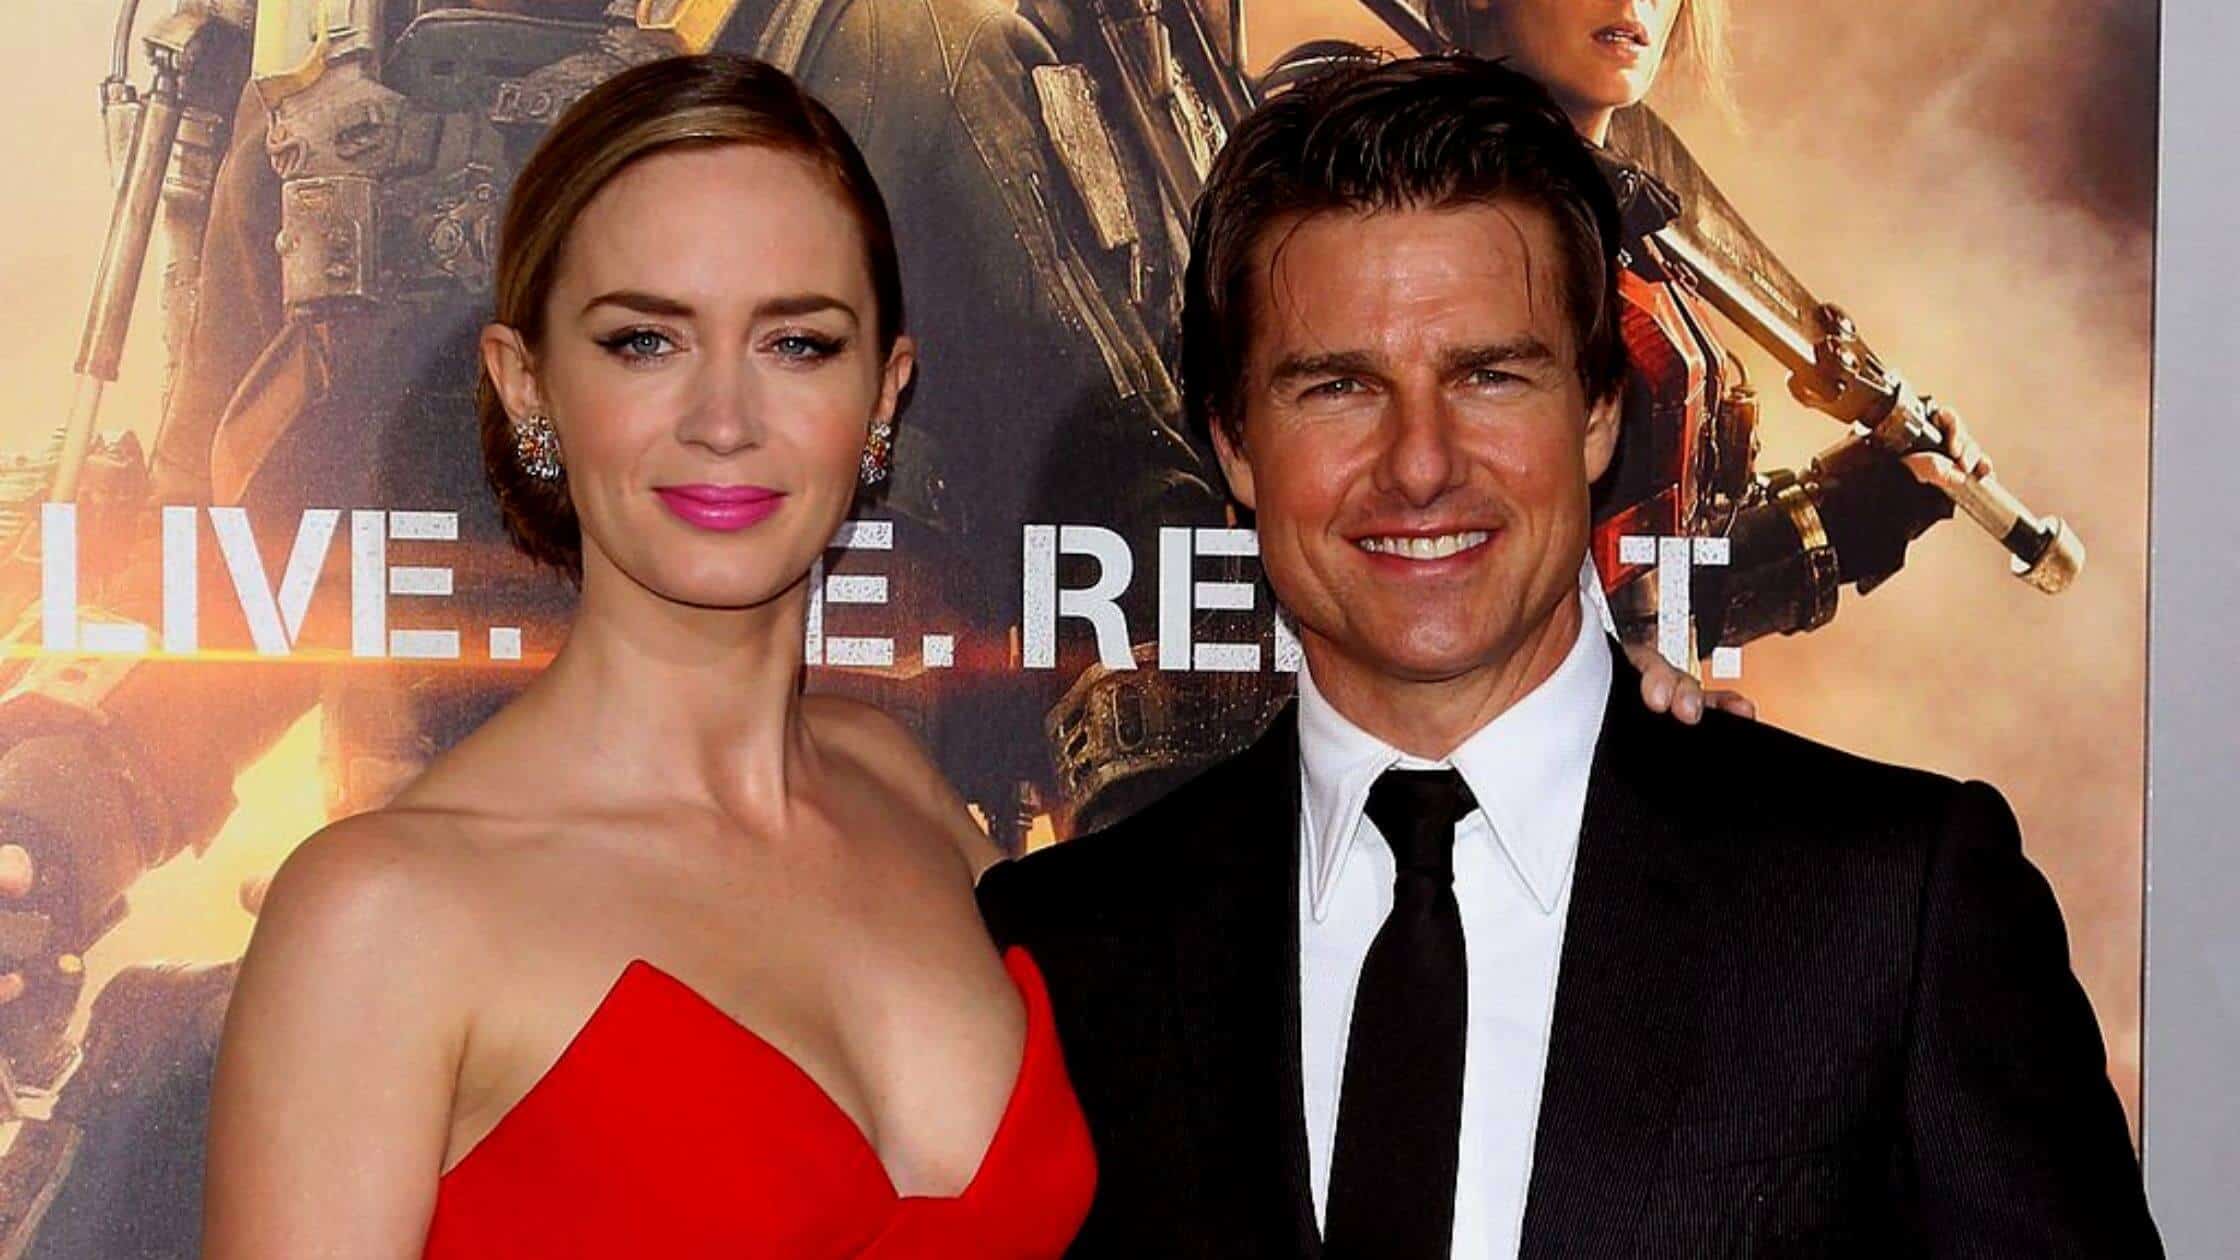 'Stop Being Such A PY' Tom Cruise Told To Emily Blunt During ‘Panicky’ Shoot